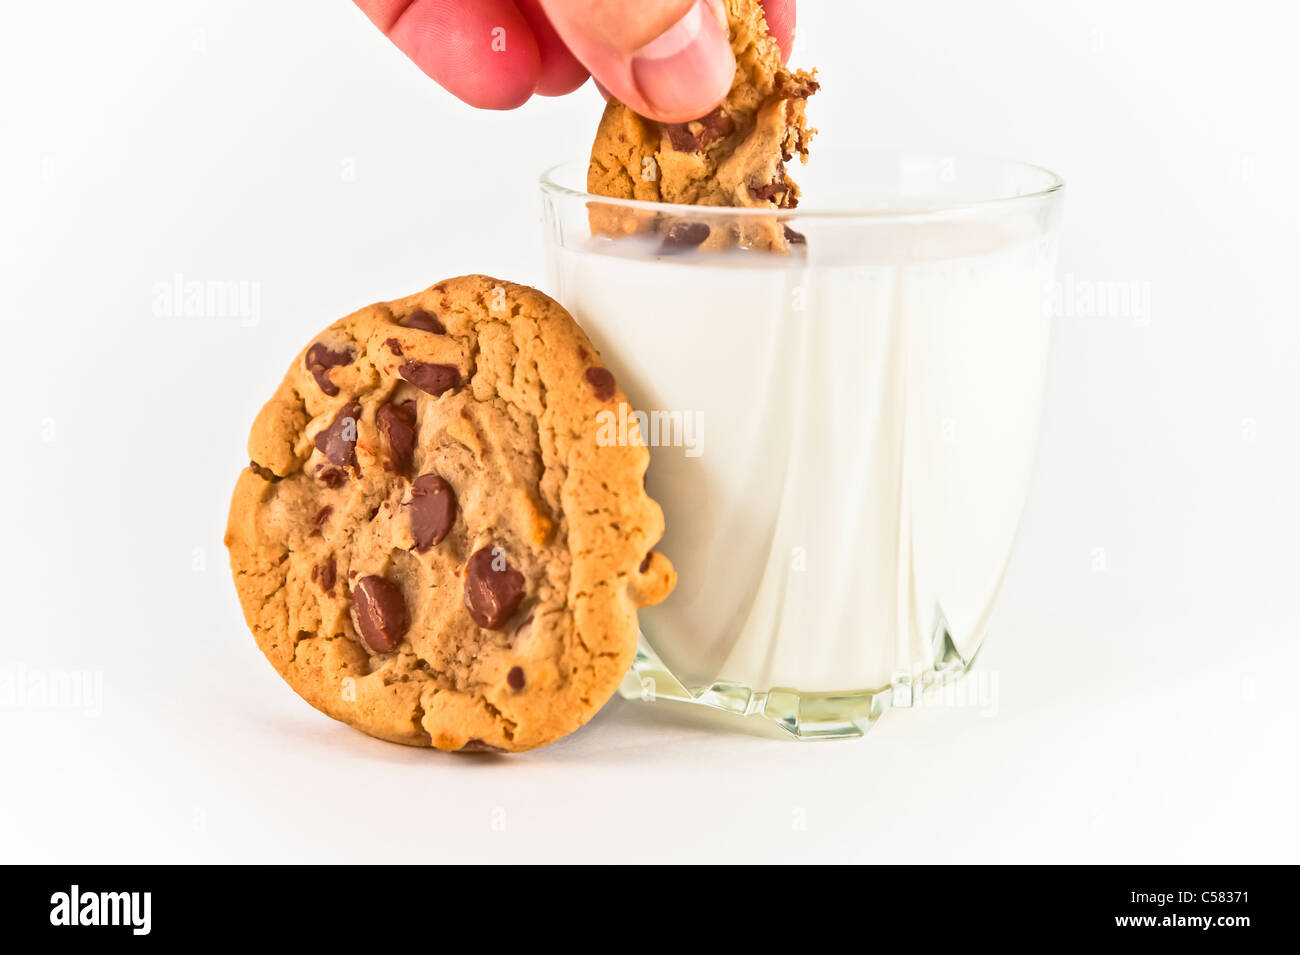 Dunking cookie in milk. Stock Photo